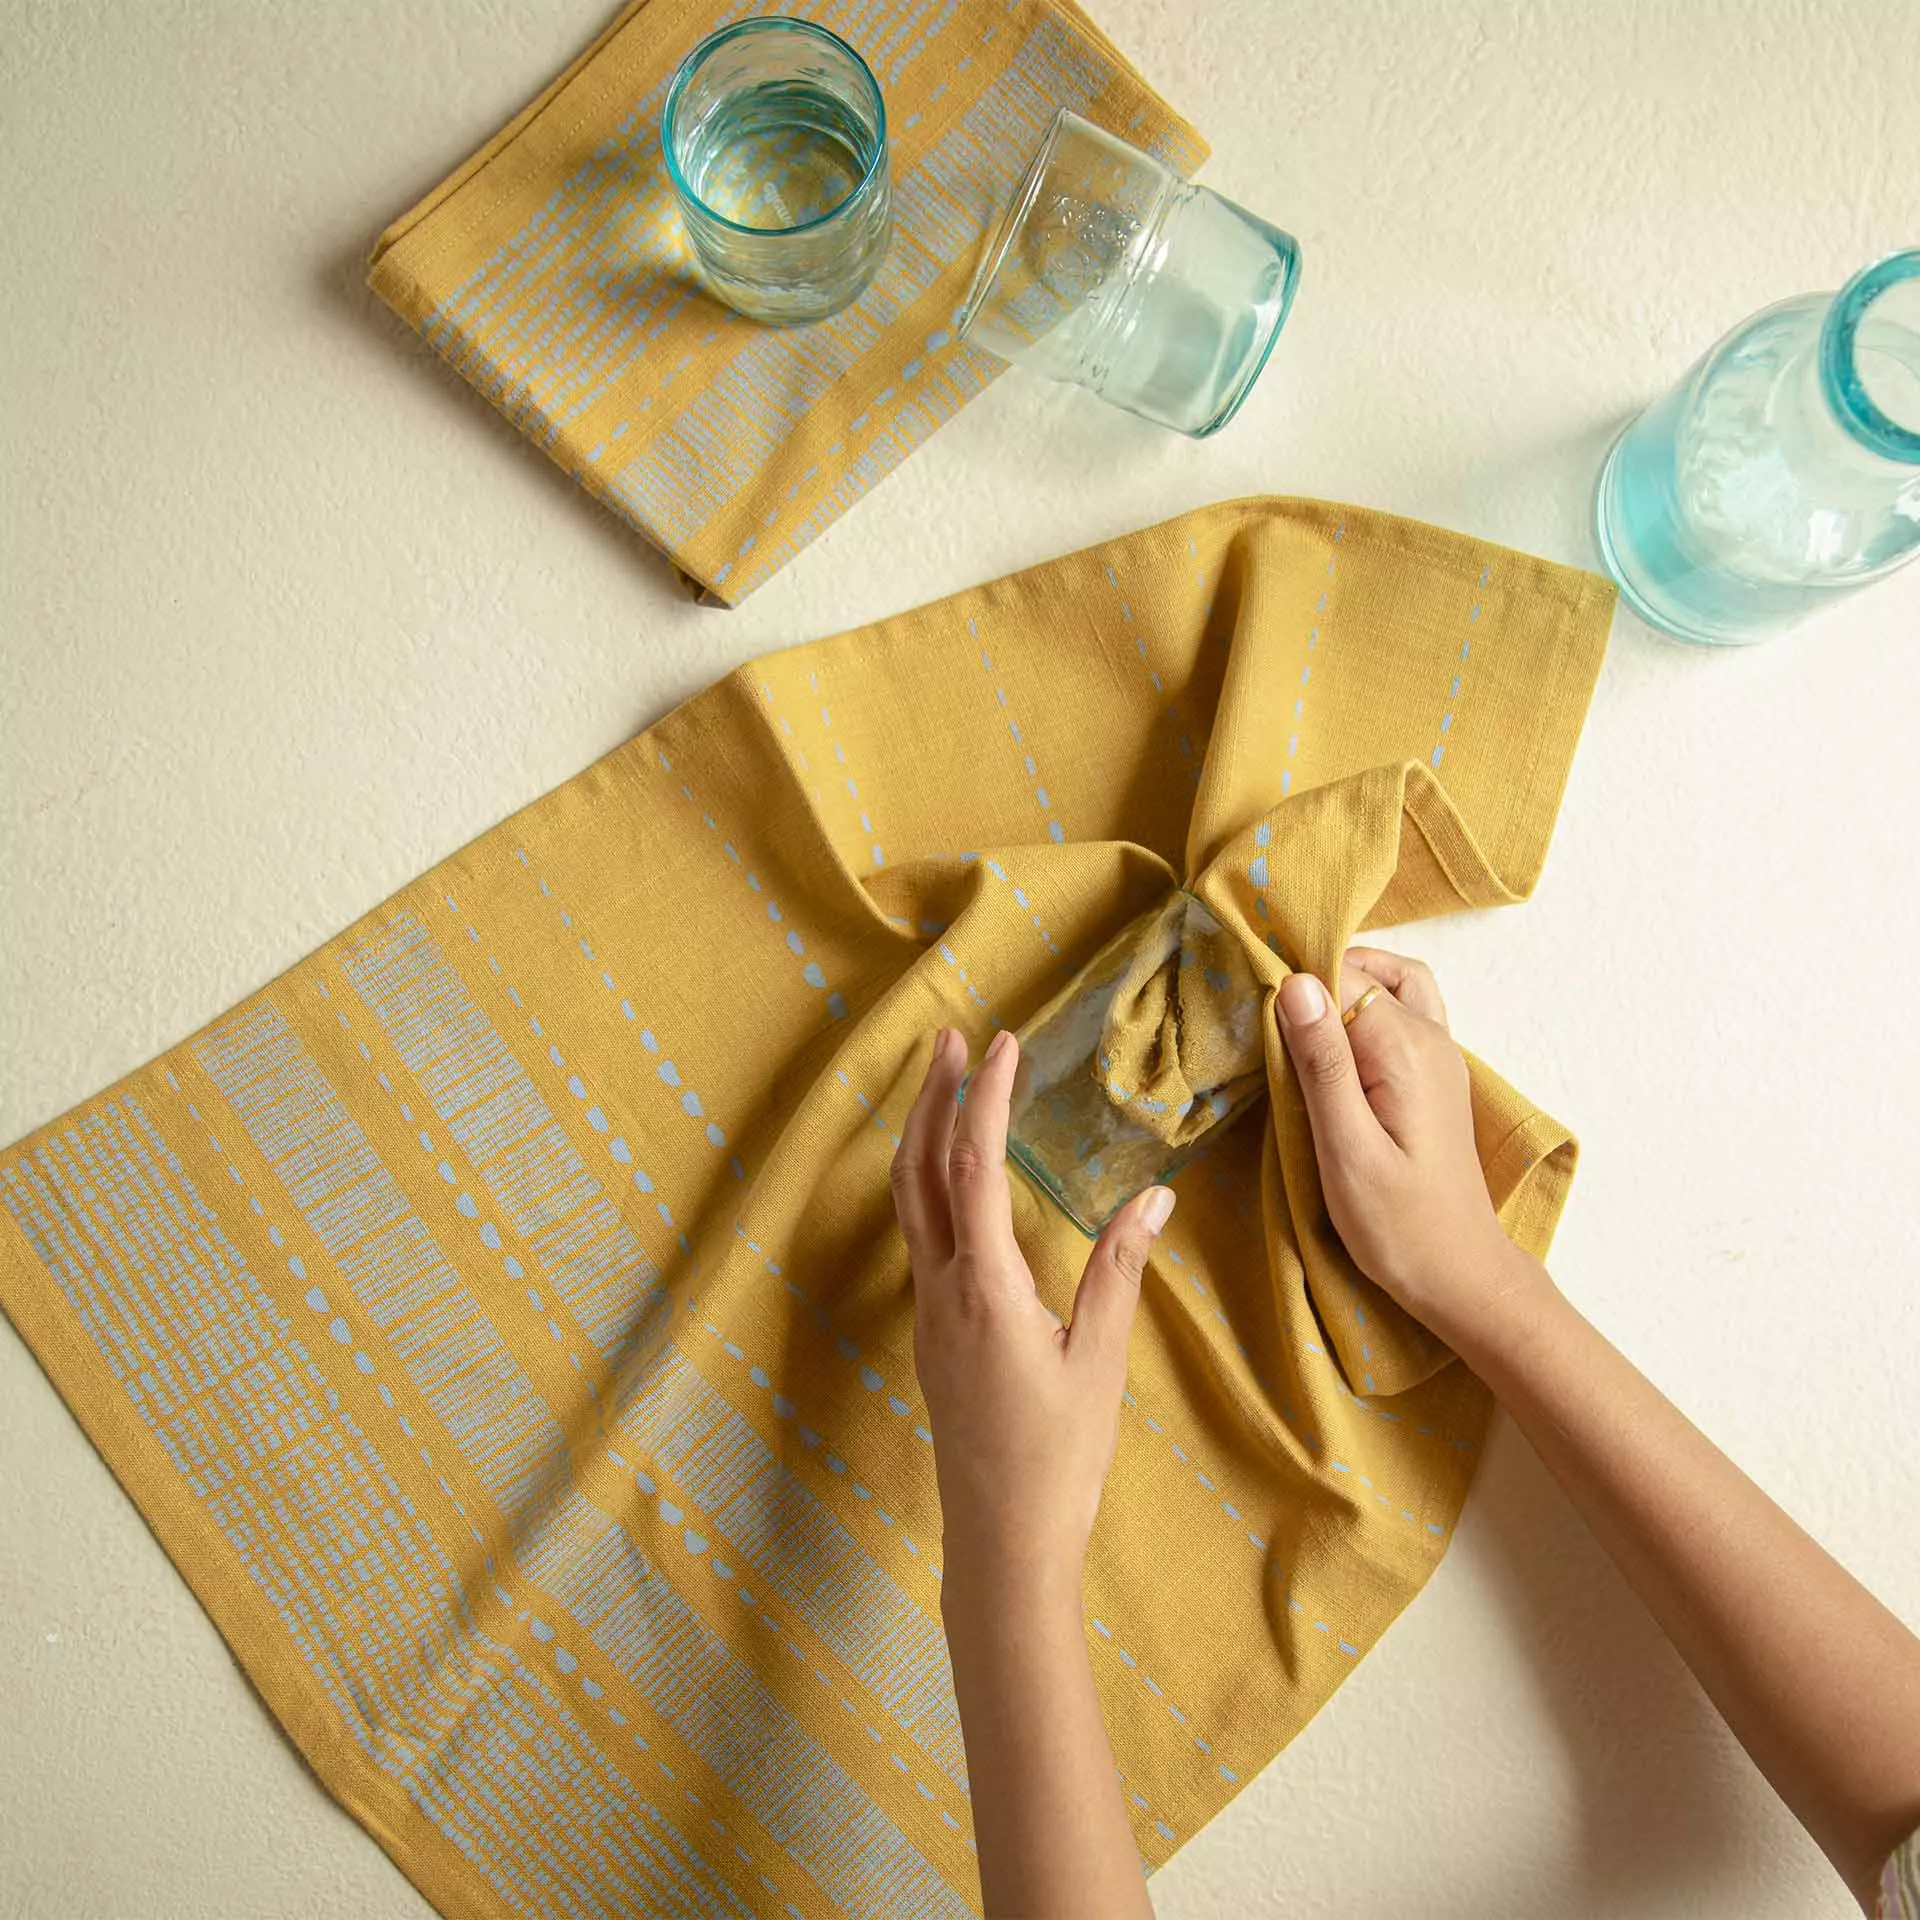 How to elevate your home with kitchen linen - Ellementry